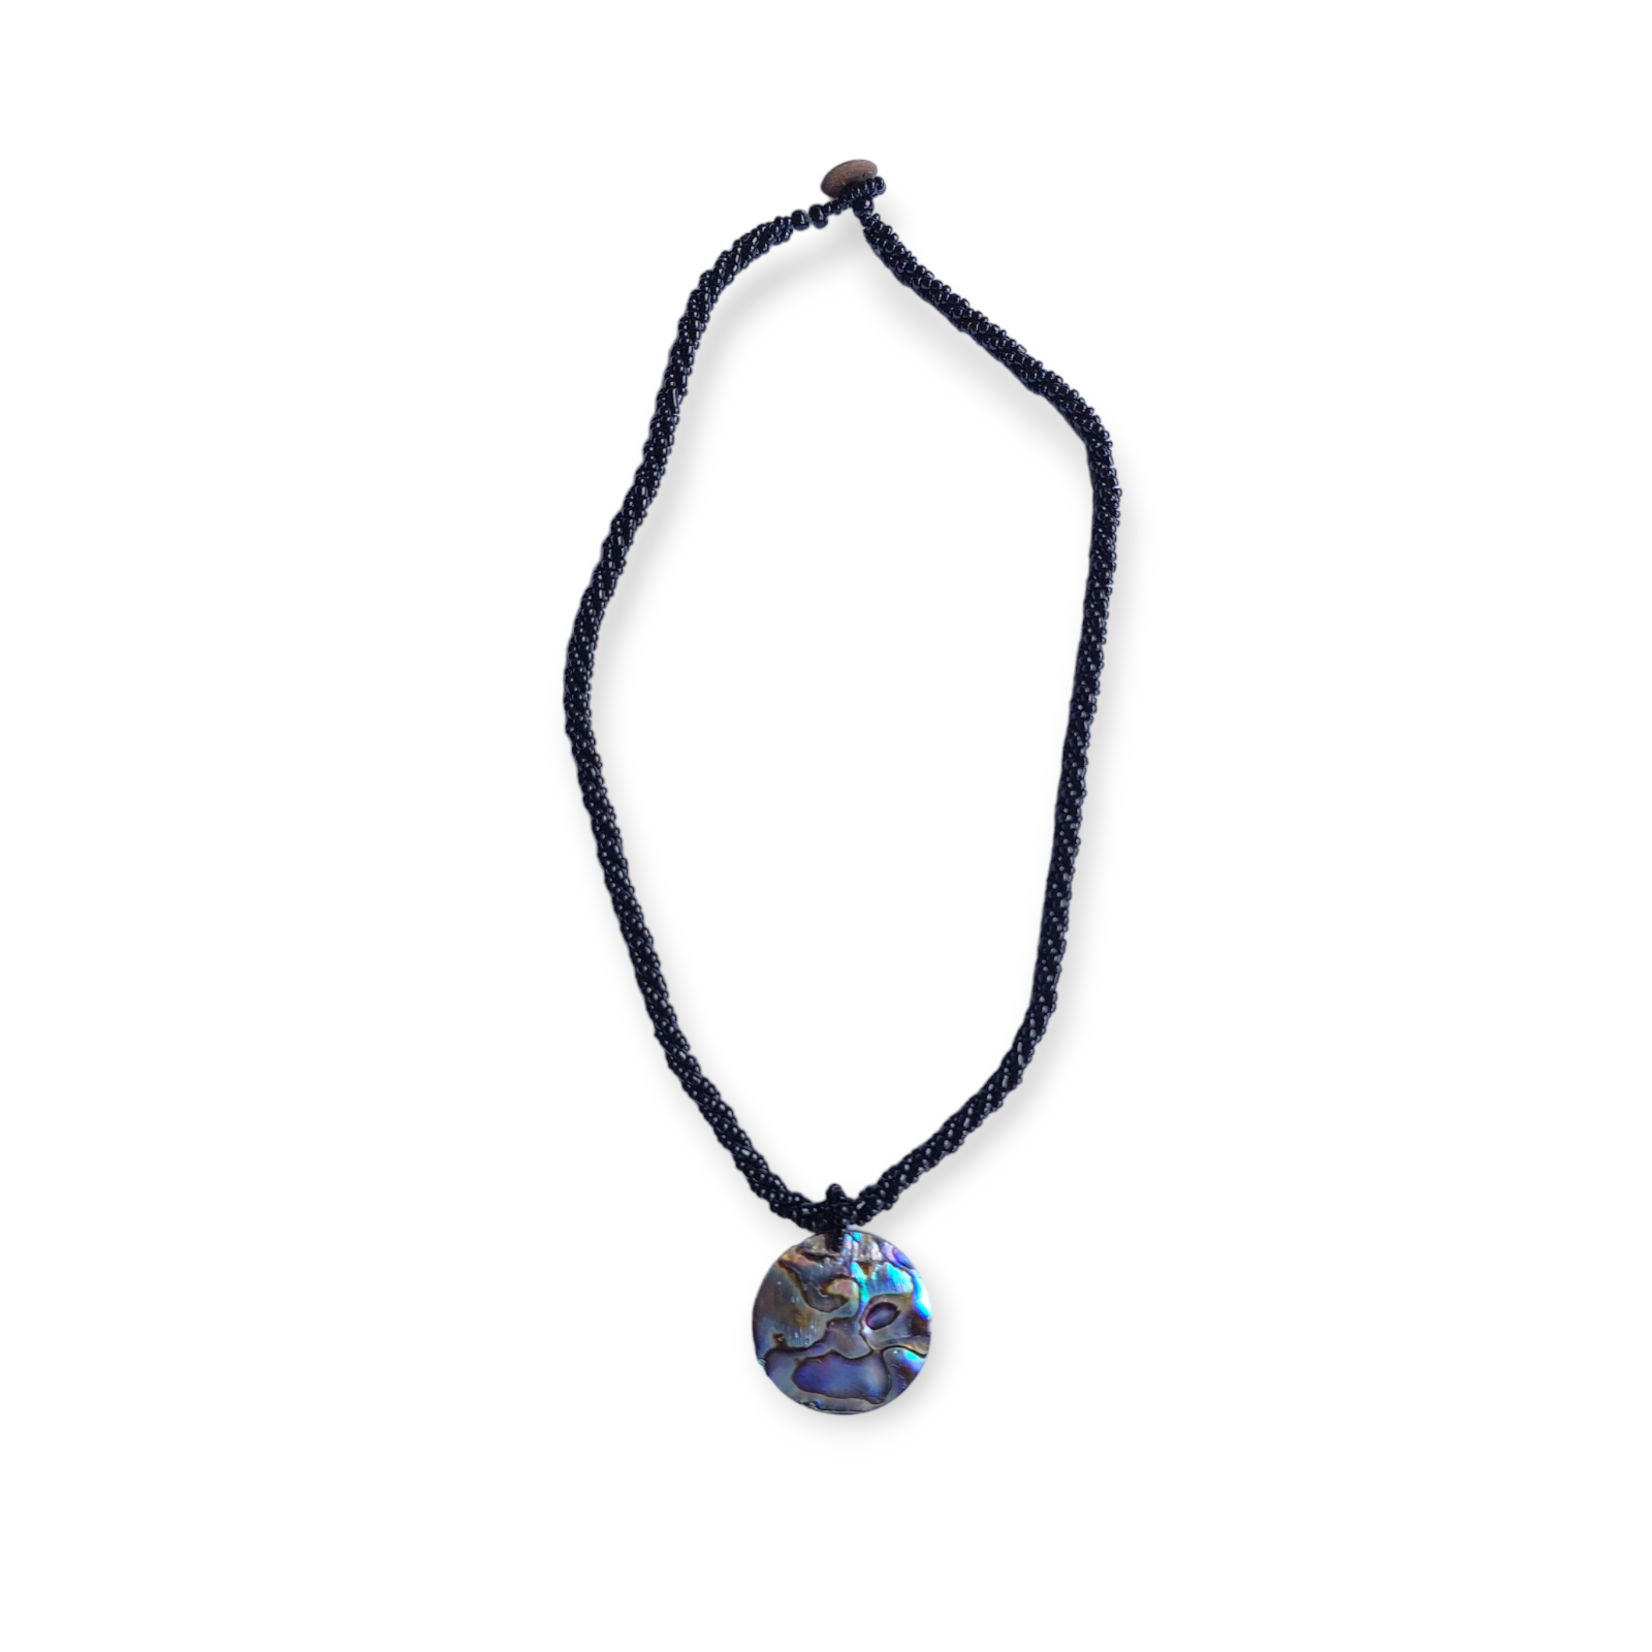 SN1 Petite Shell Necklace Paua Disc with Black Beads